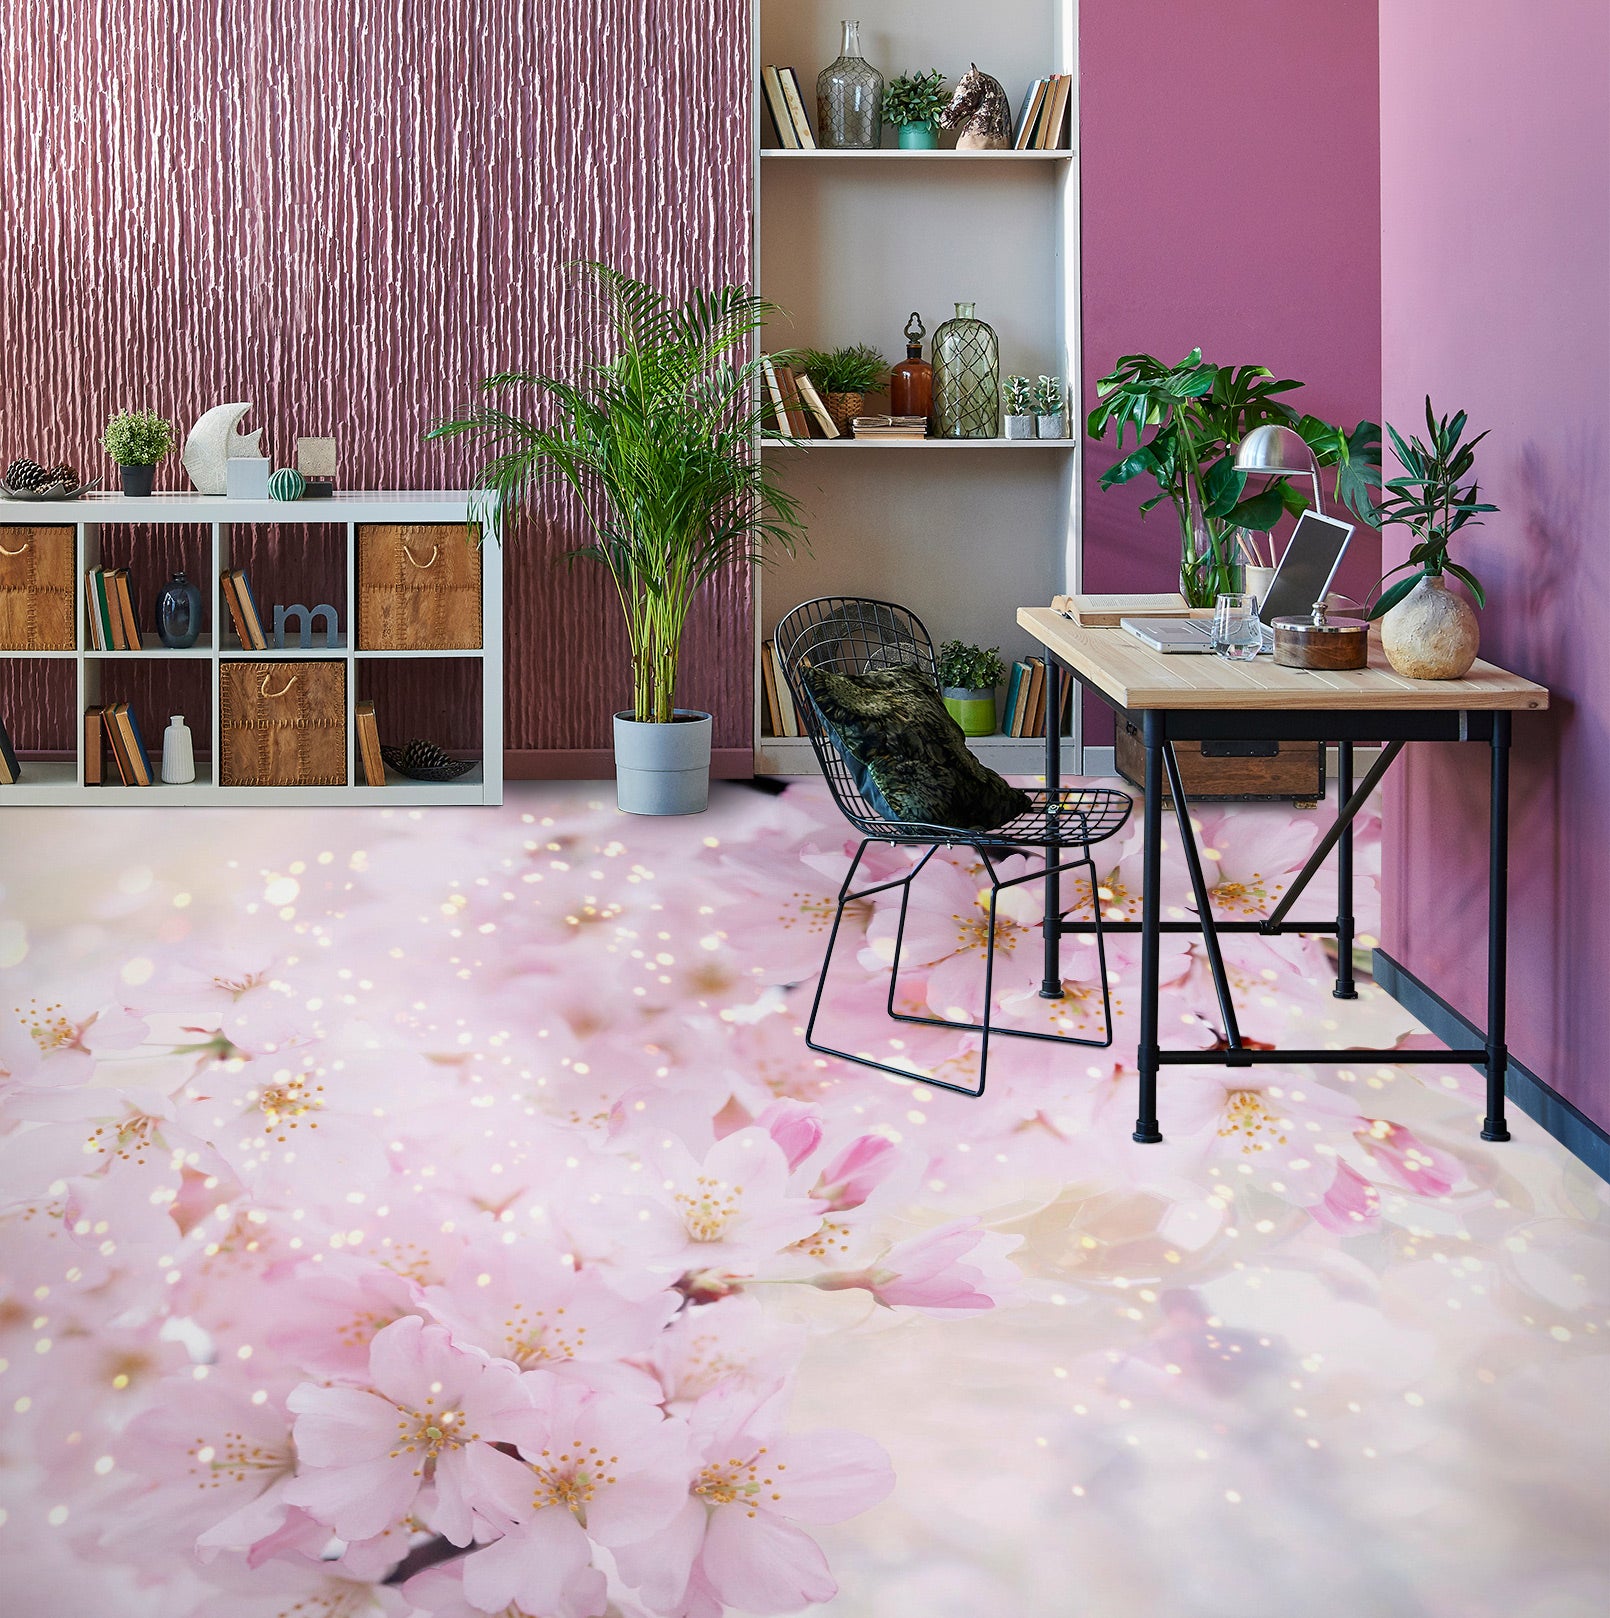 3D Charming Pink Flowers 1363 Floor Mural  Wallpaper Murals Self-Adhesive Removable Print Epoxy